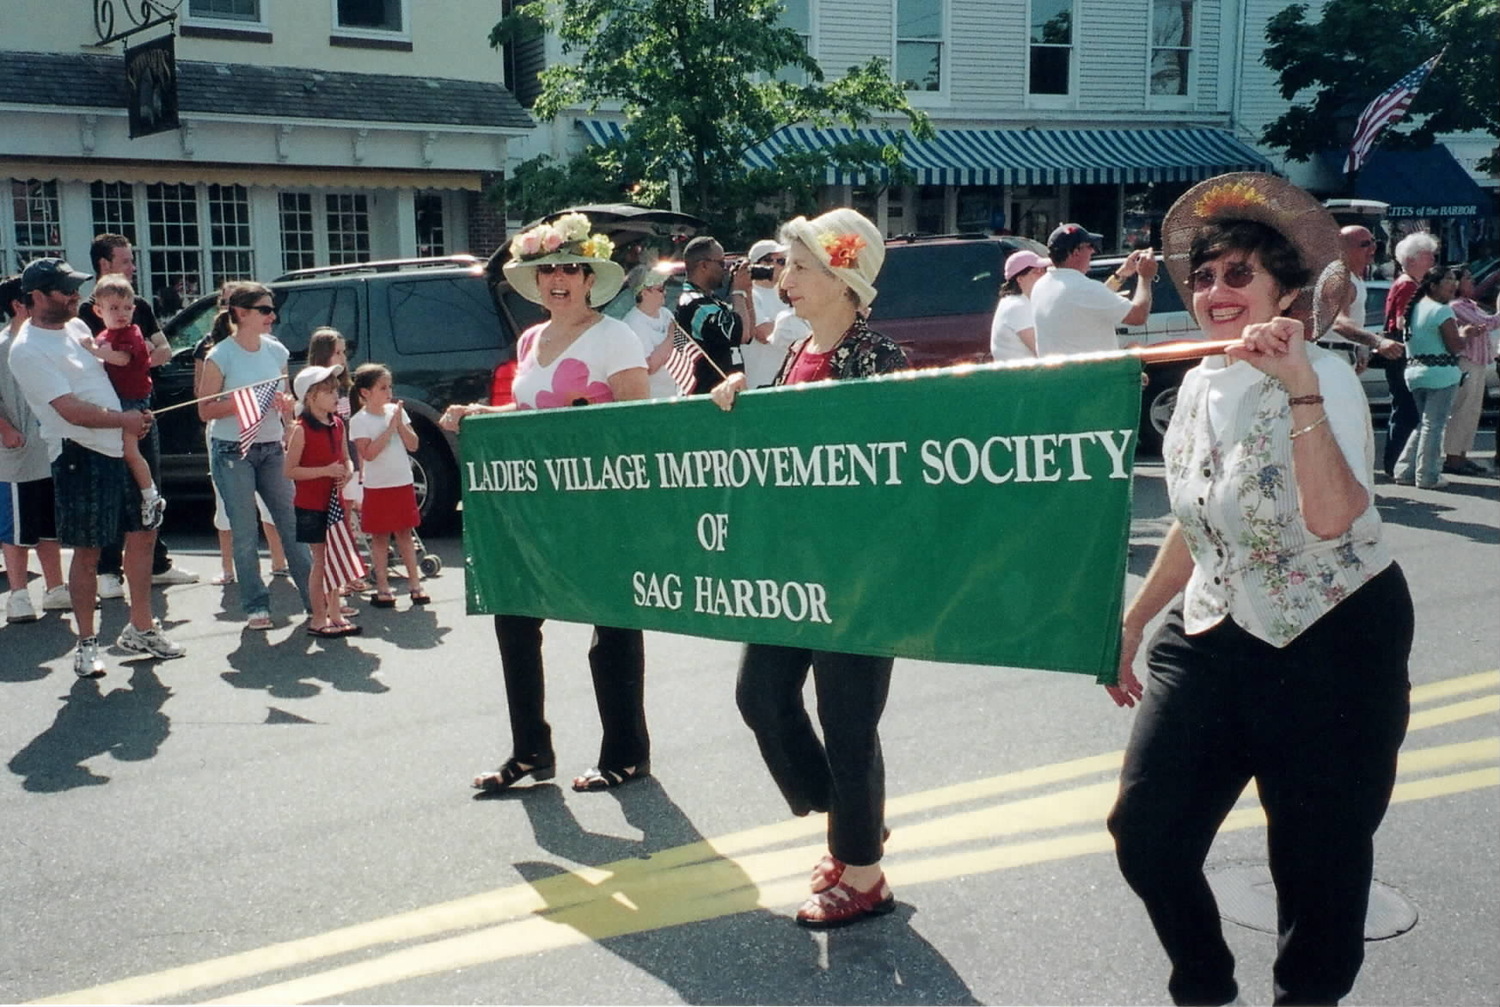 Diane Lewis, Margaret Bromberg and Ann Lieber, from left, carry the LVIS banner in a Sag Harbor parade. COURTESY BETHANY DEYERMOND